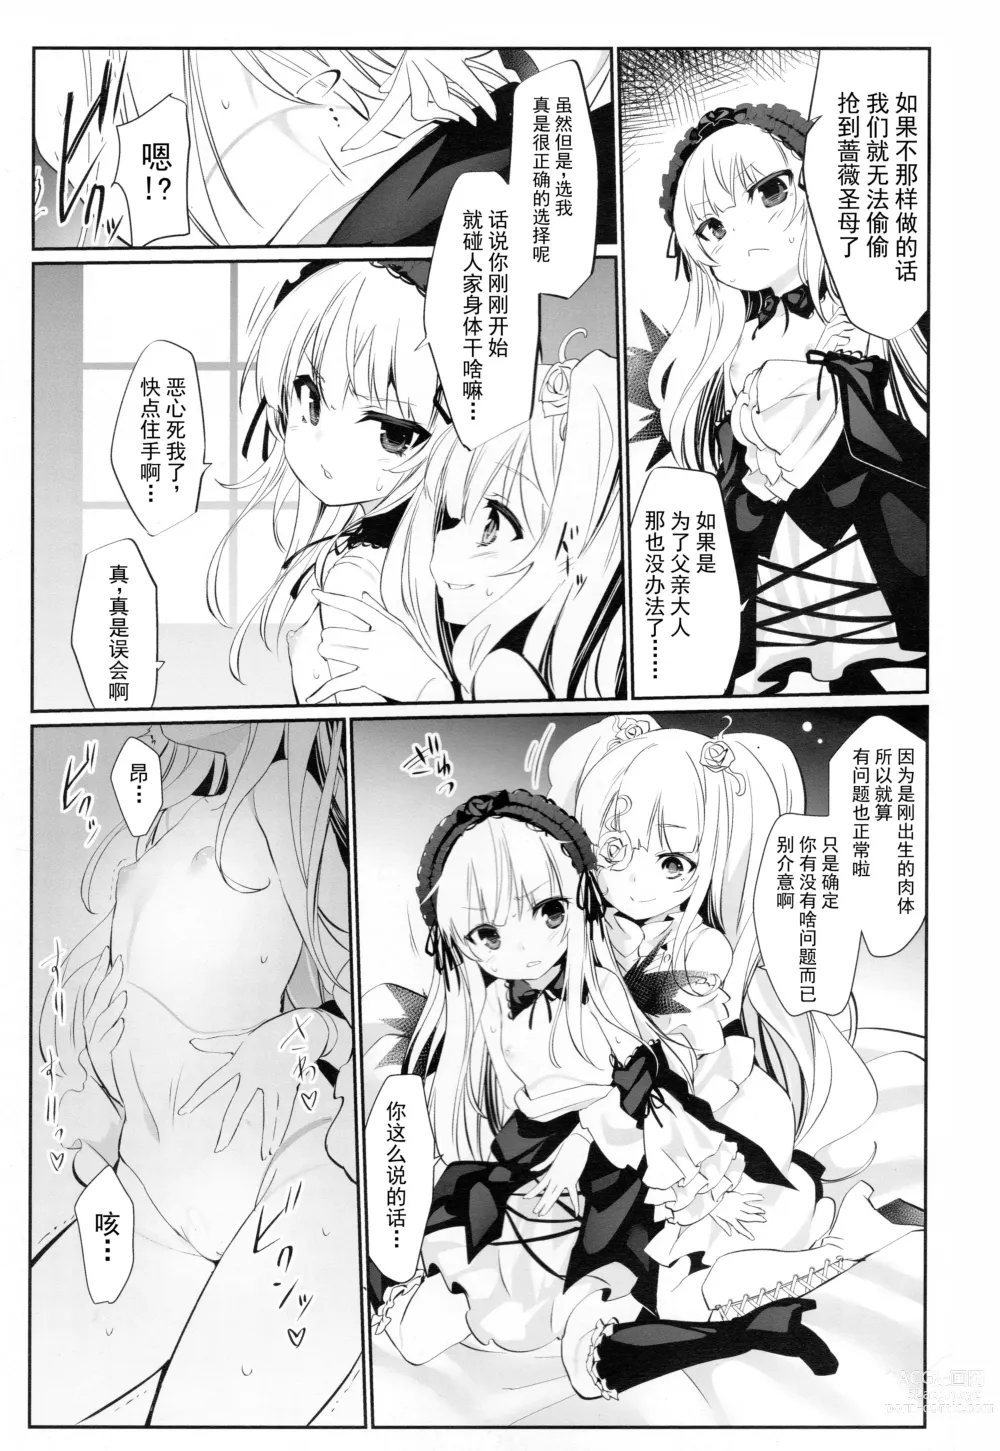 Page 4 of doujinshi Glamour Growth